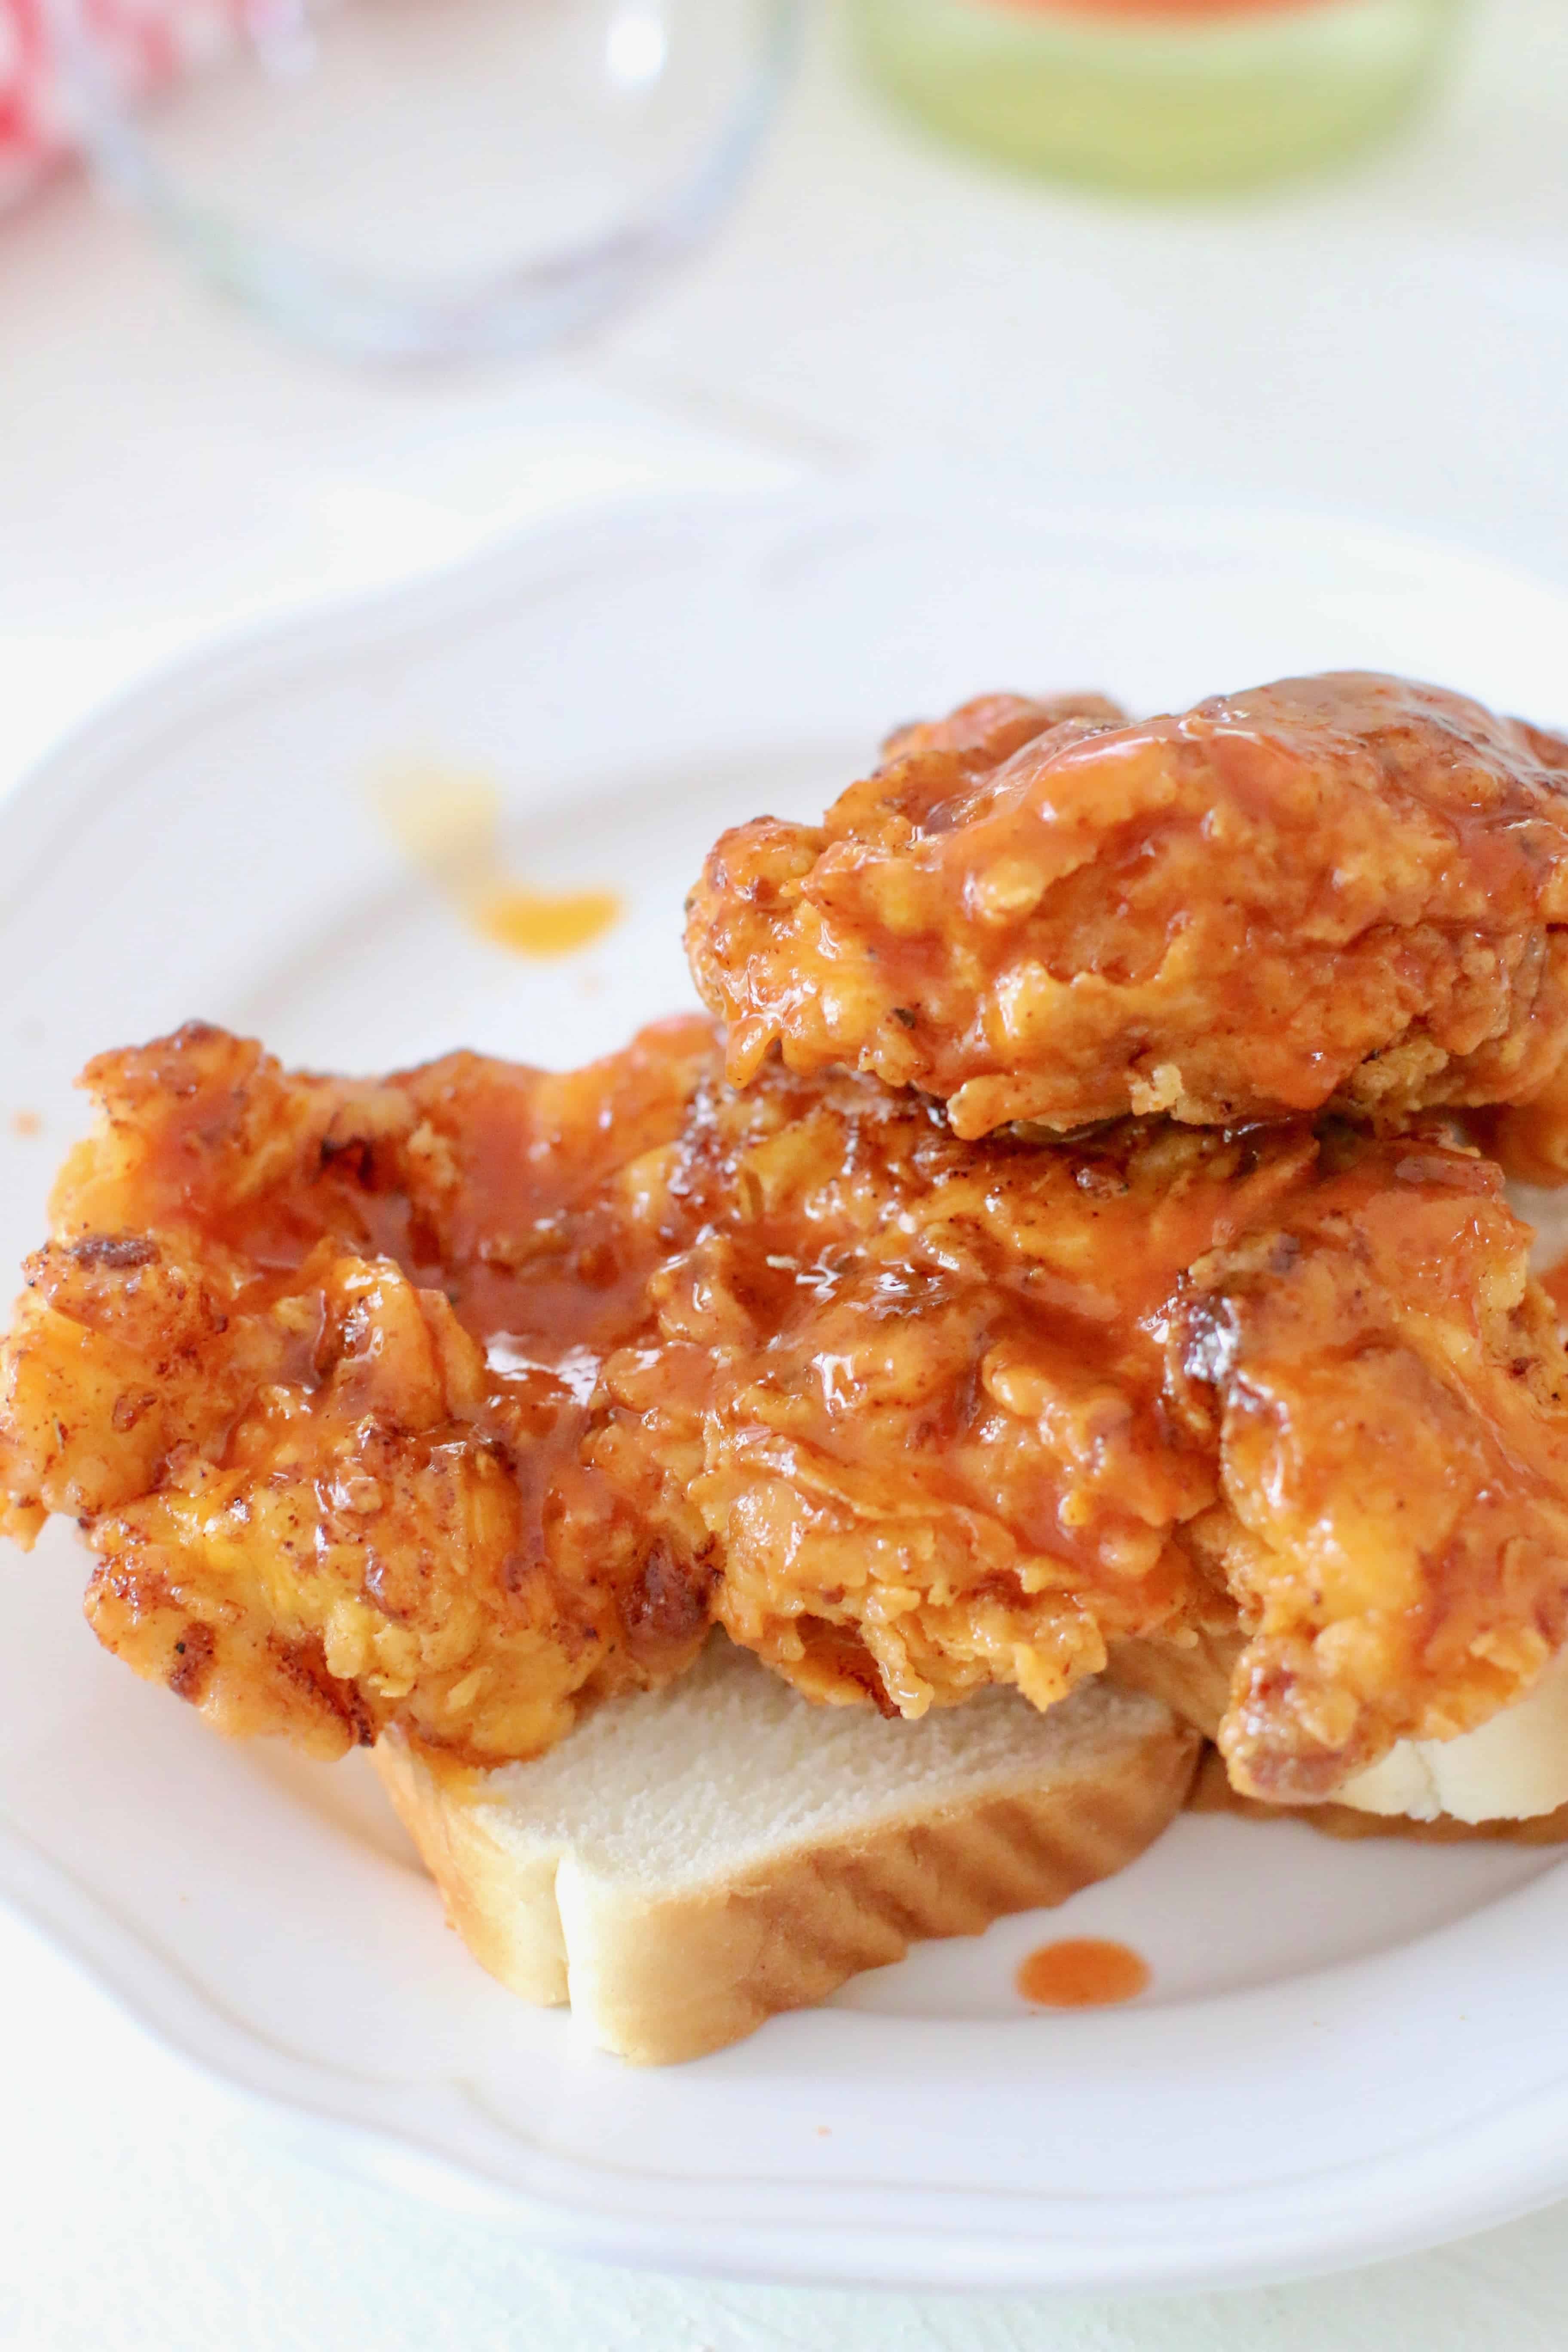 Nashville Hot Chicken sauce poured on top of fried chicken breasts on white bread.